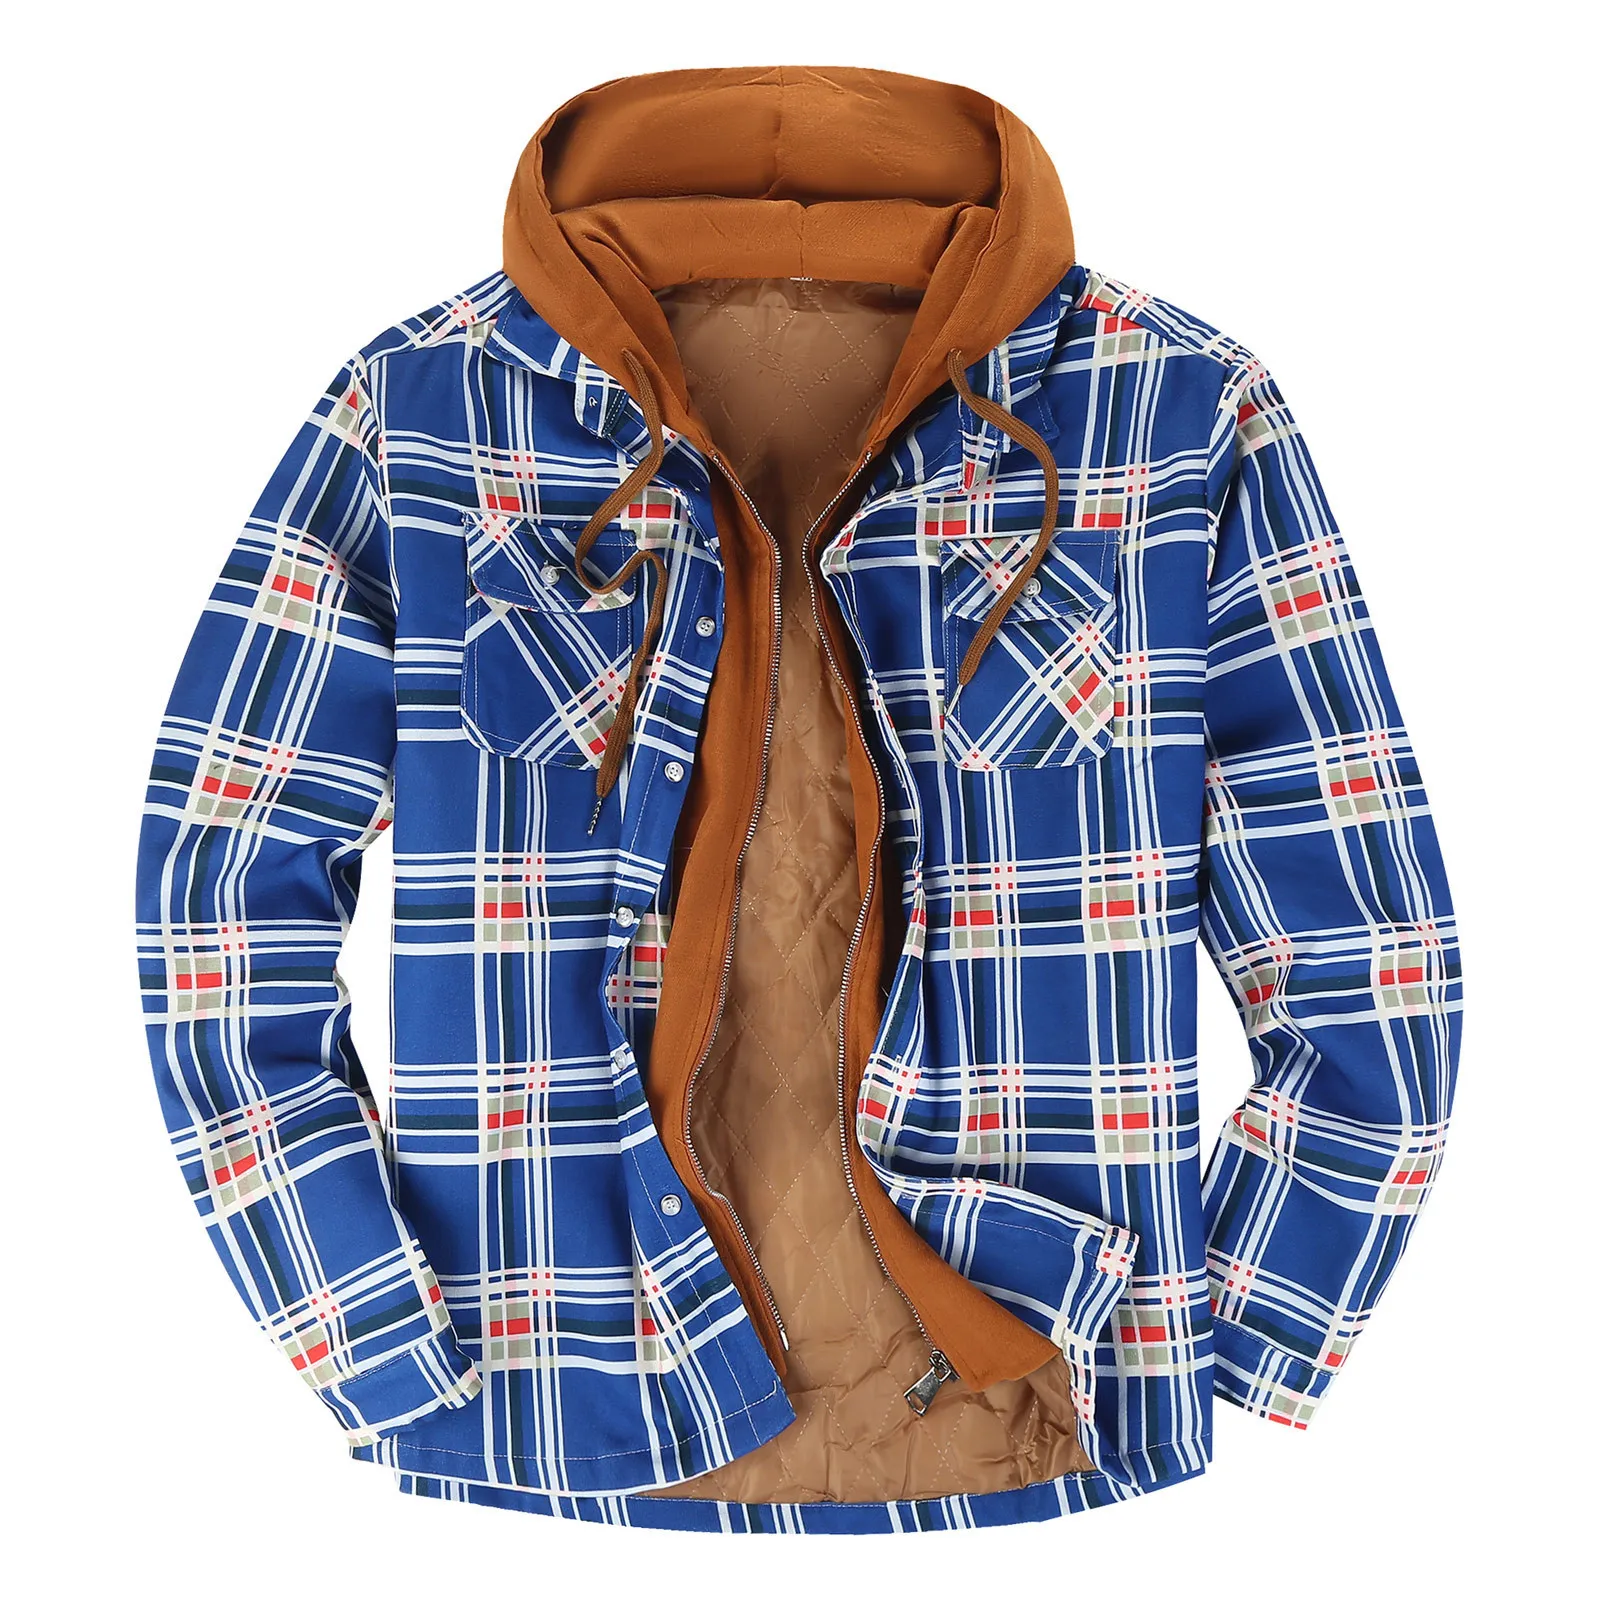 

Men'S Quilted Lined Jacket Fashion Plain Print Outwear Male Button Down Plaid Shirt Add Velvet To Keep Warm Jacket With Hood